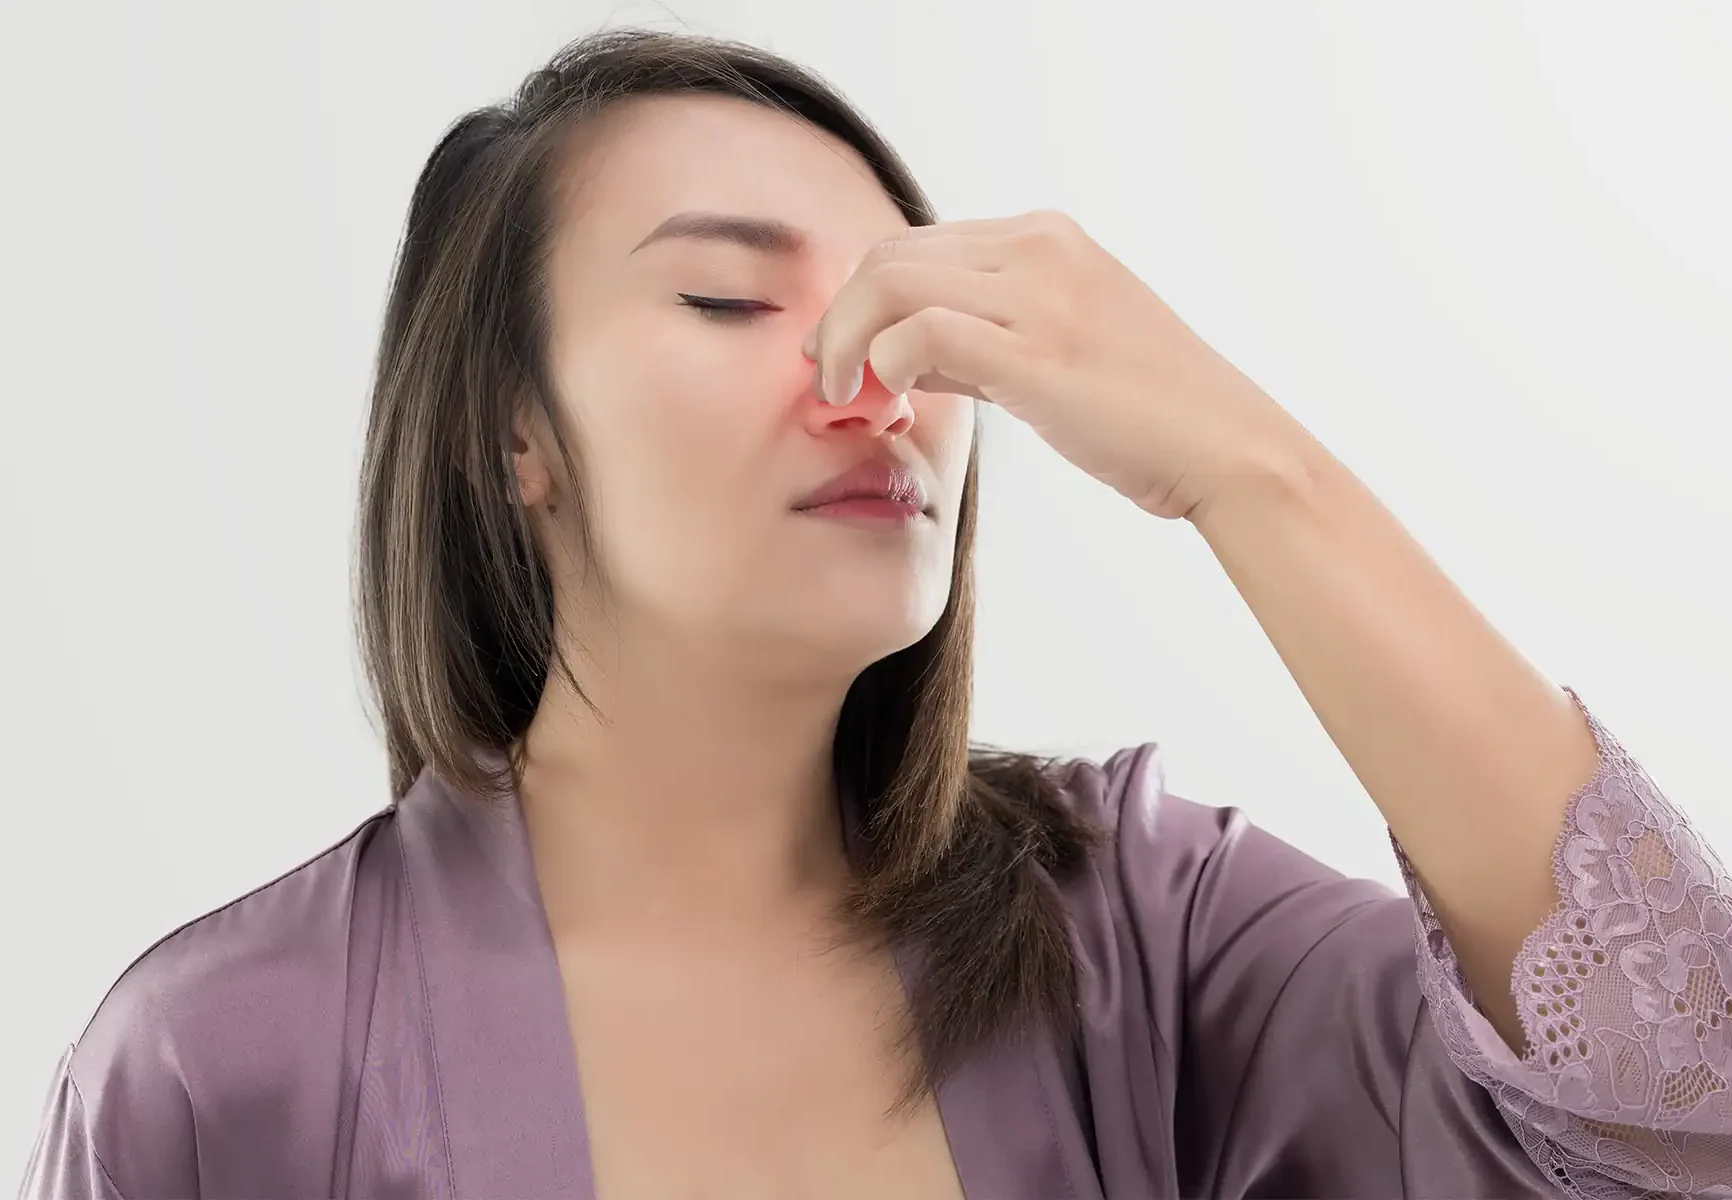 Woman with nasal obstruction holding her nose